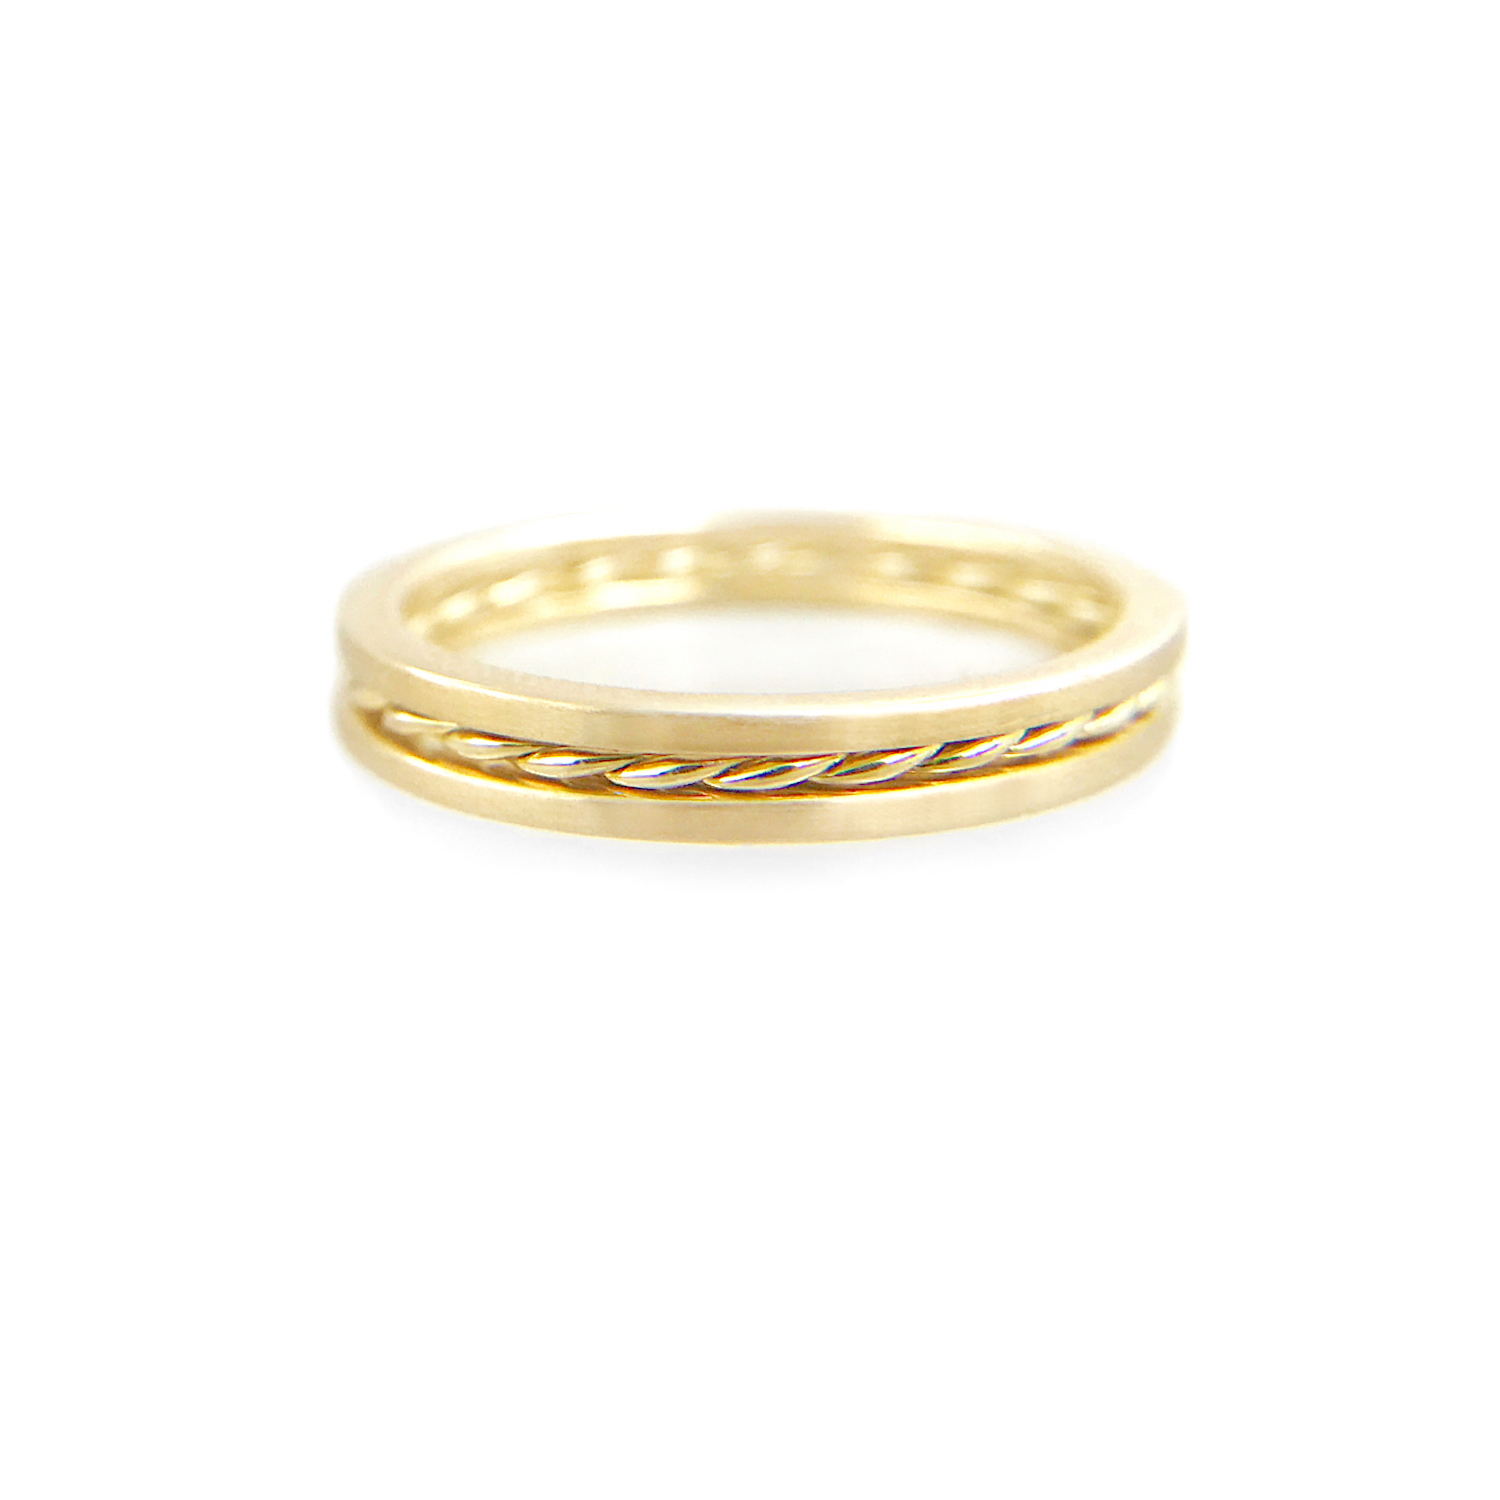 JeweLyrie Signature Slim Twist Satin Stripe Band Three Ring Stacking with stripe of Satin band and slim twist in 14k or 18k